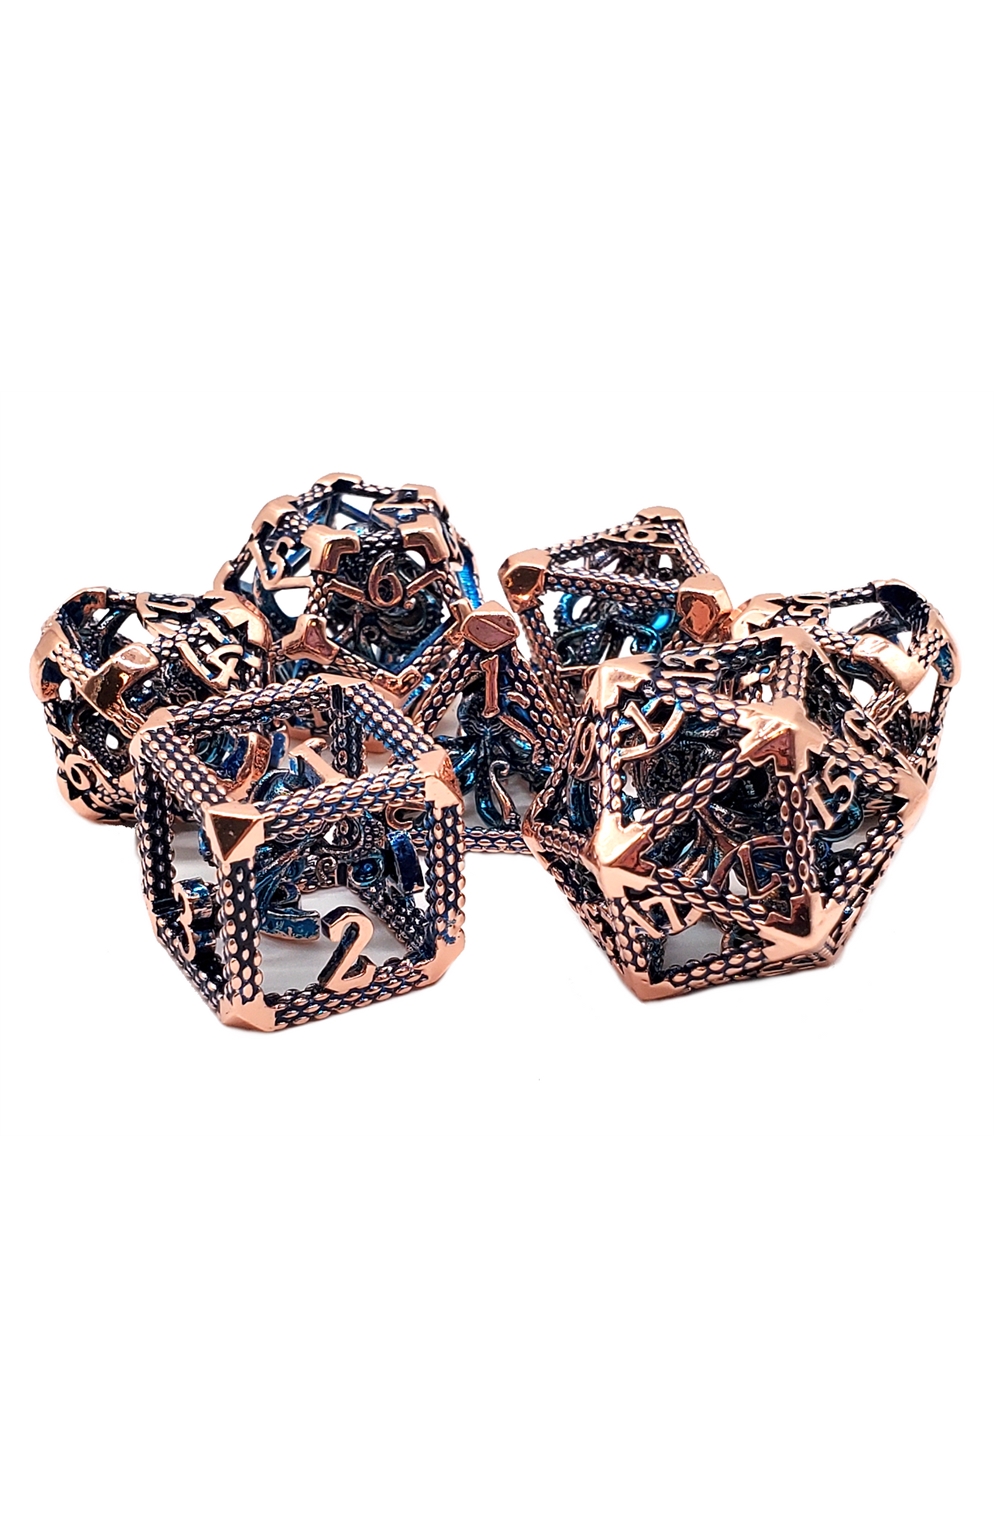 Hollow Dice: The Kraken: Copper With Blue